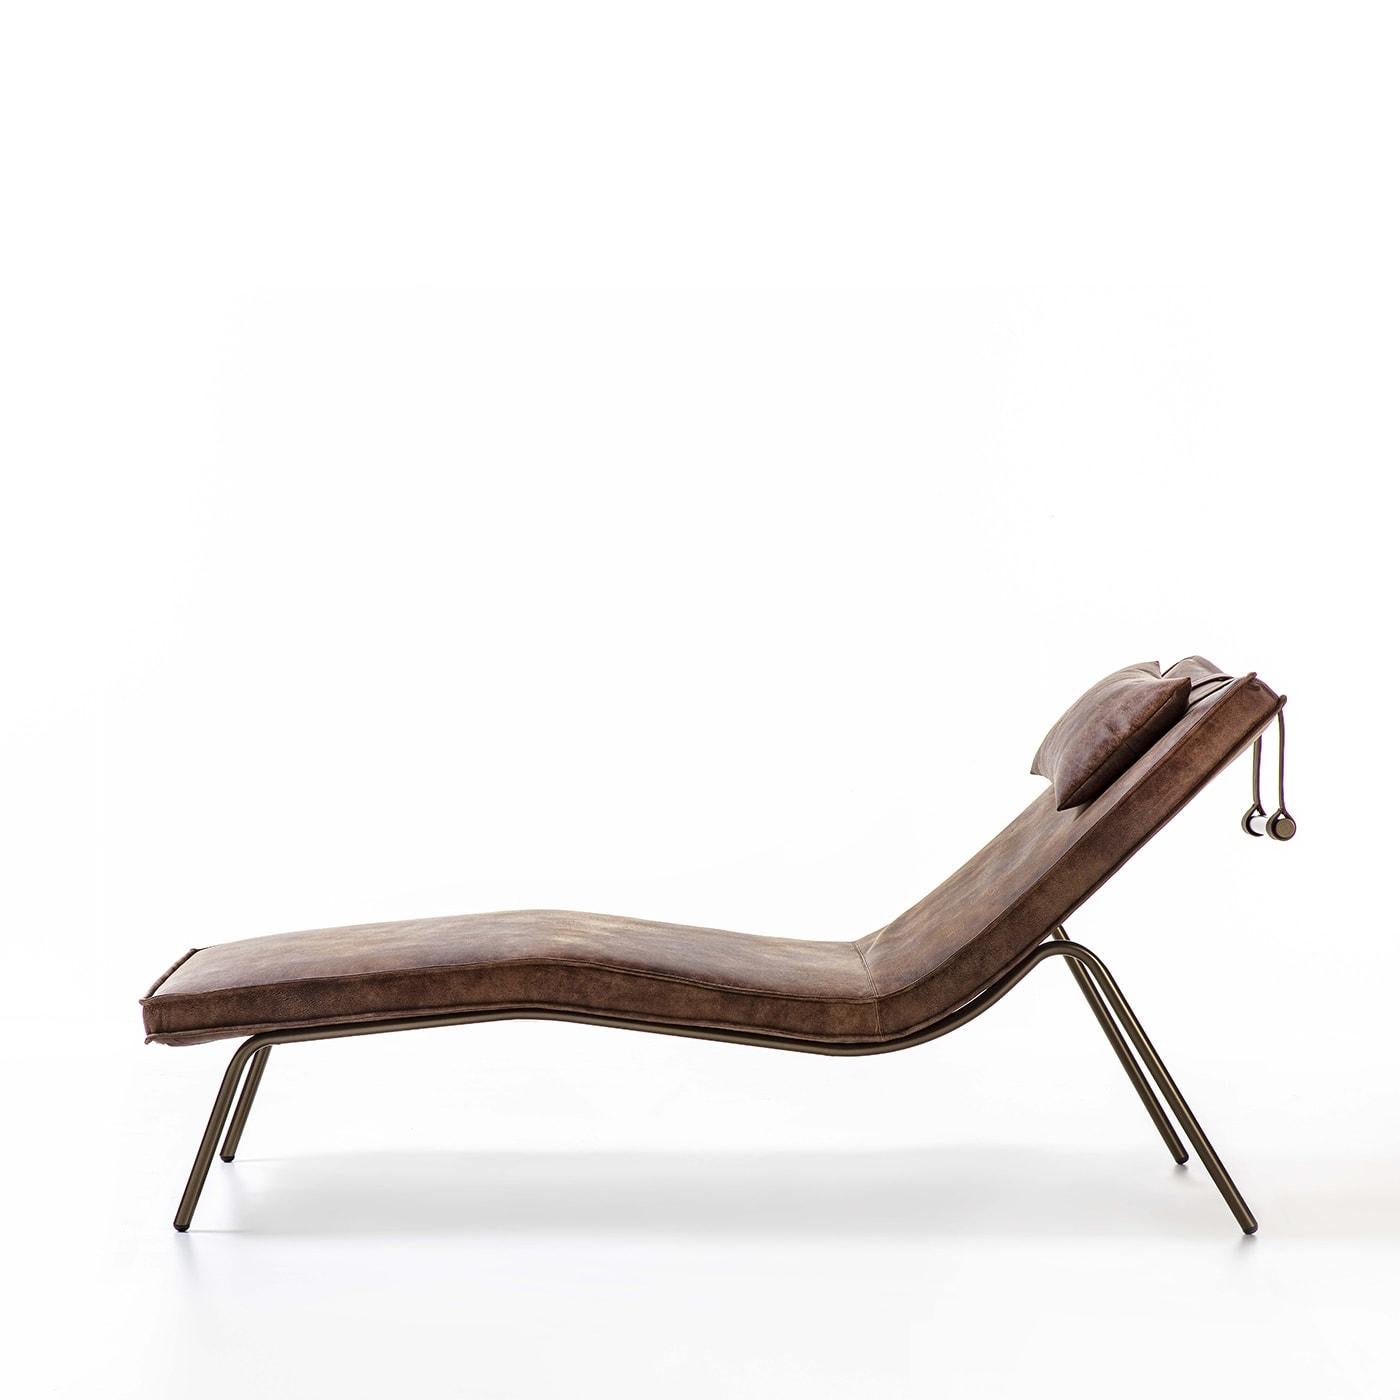 Showcasing a fluid silhouette crafted of bronzed cylindrical steel, padded in expanded polyurethane, and upholstered in vintage brown leather, this elegant chaise longue makes for the perfect spot for taking a nap or relax while reading a magazine.